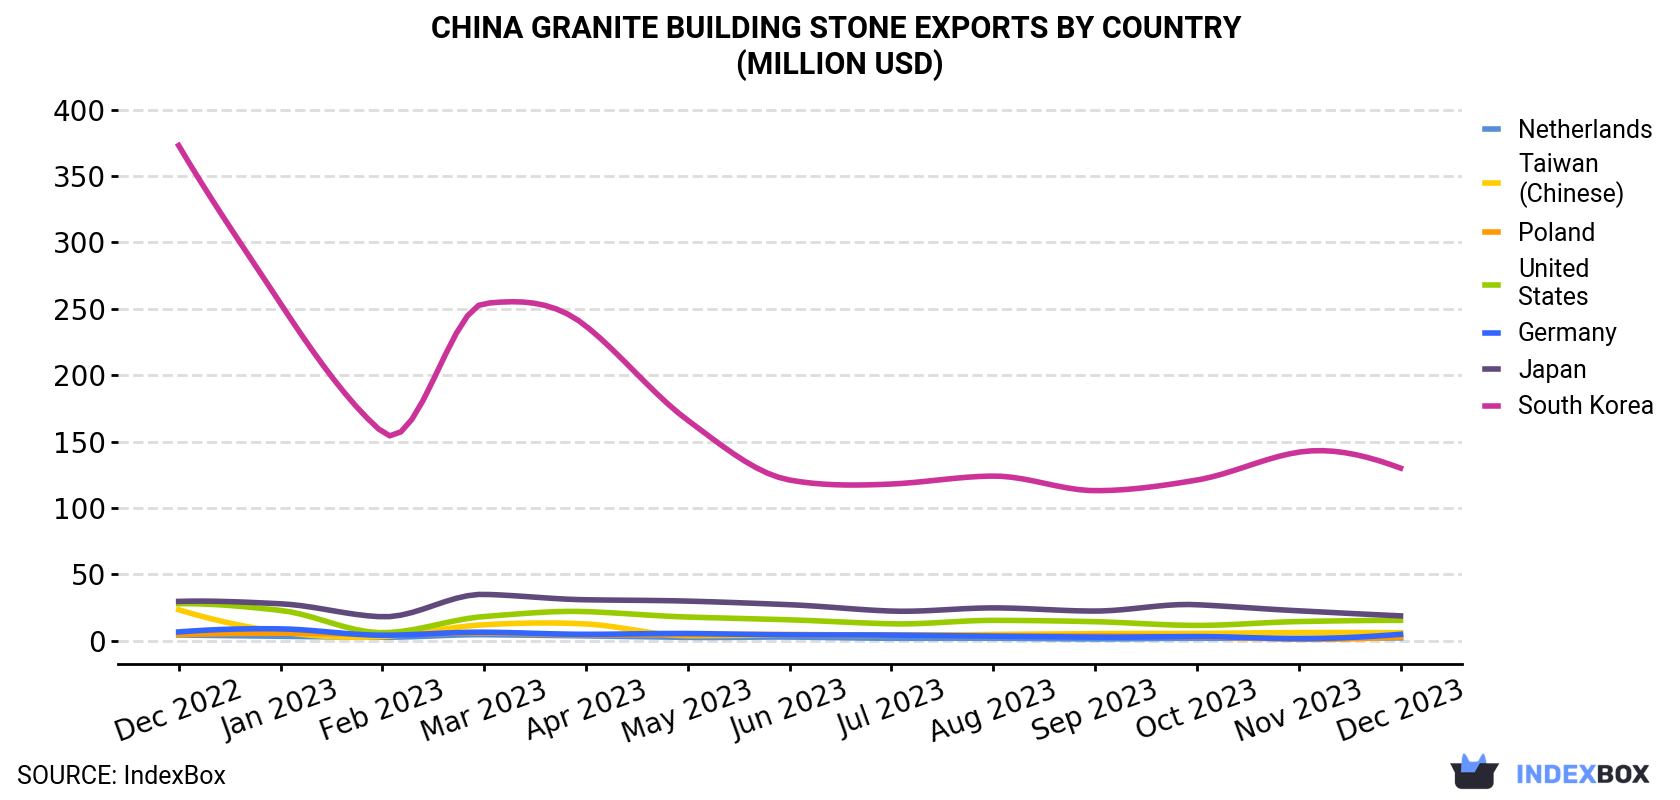 China Granite Building Stone Exports By Country (Million USD)